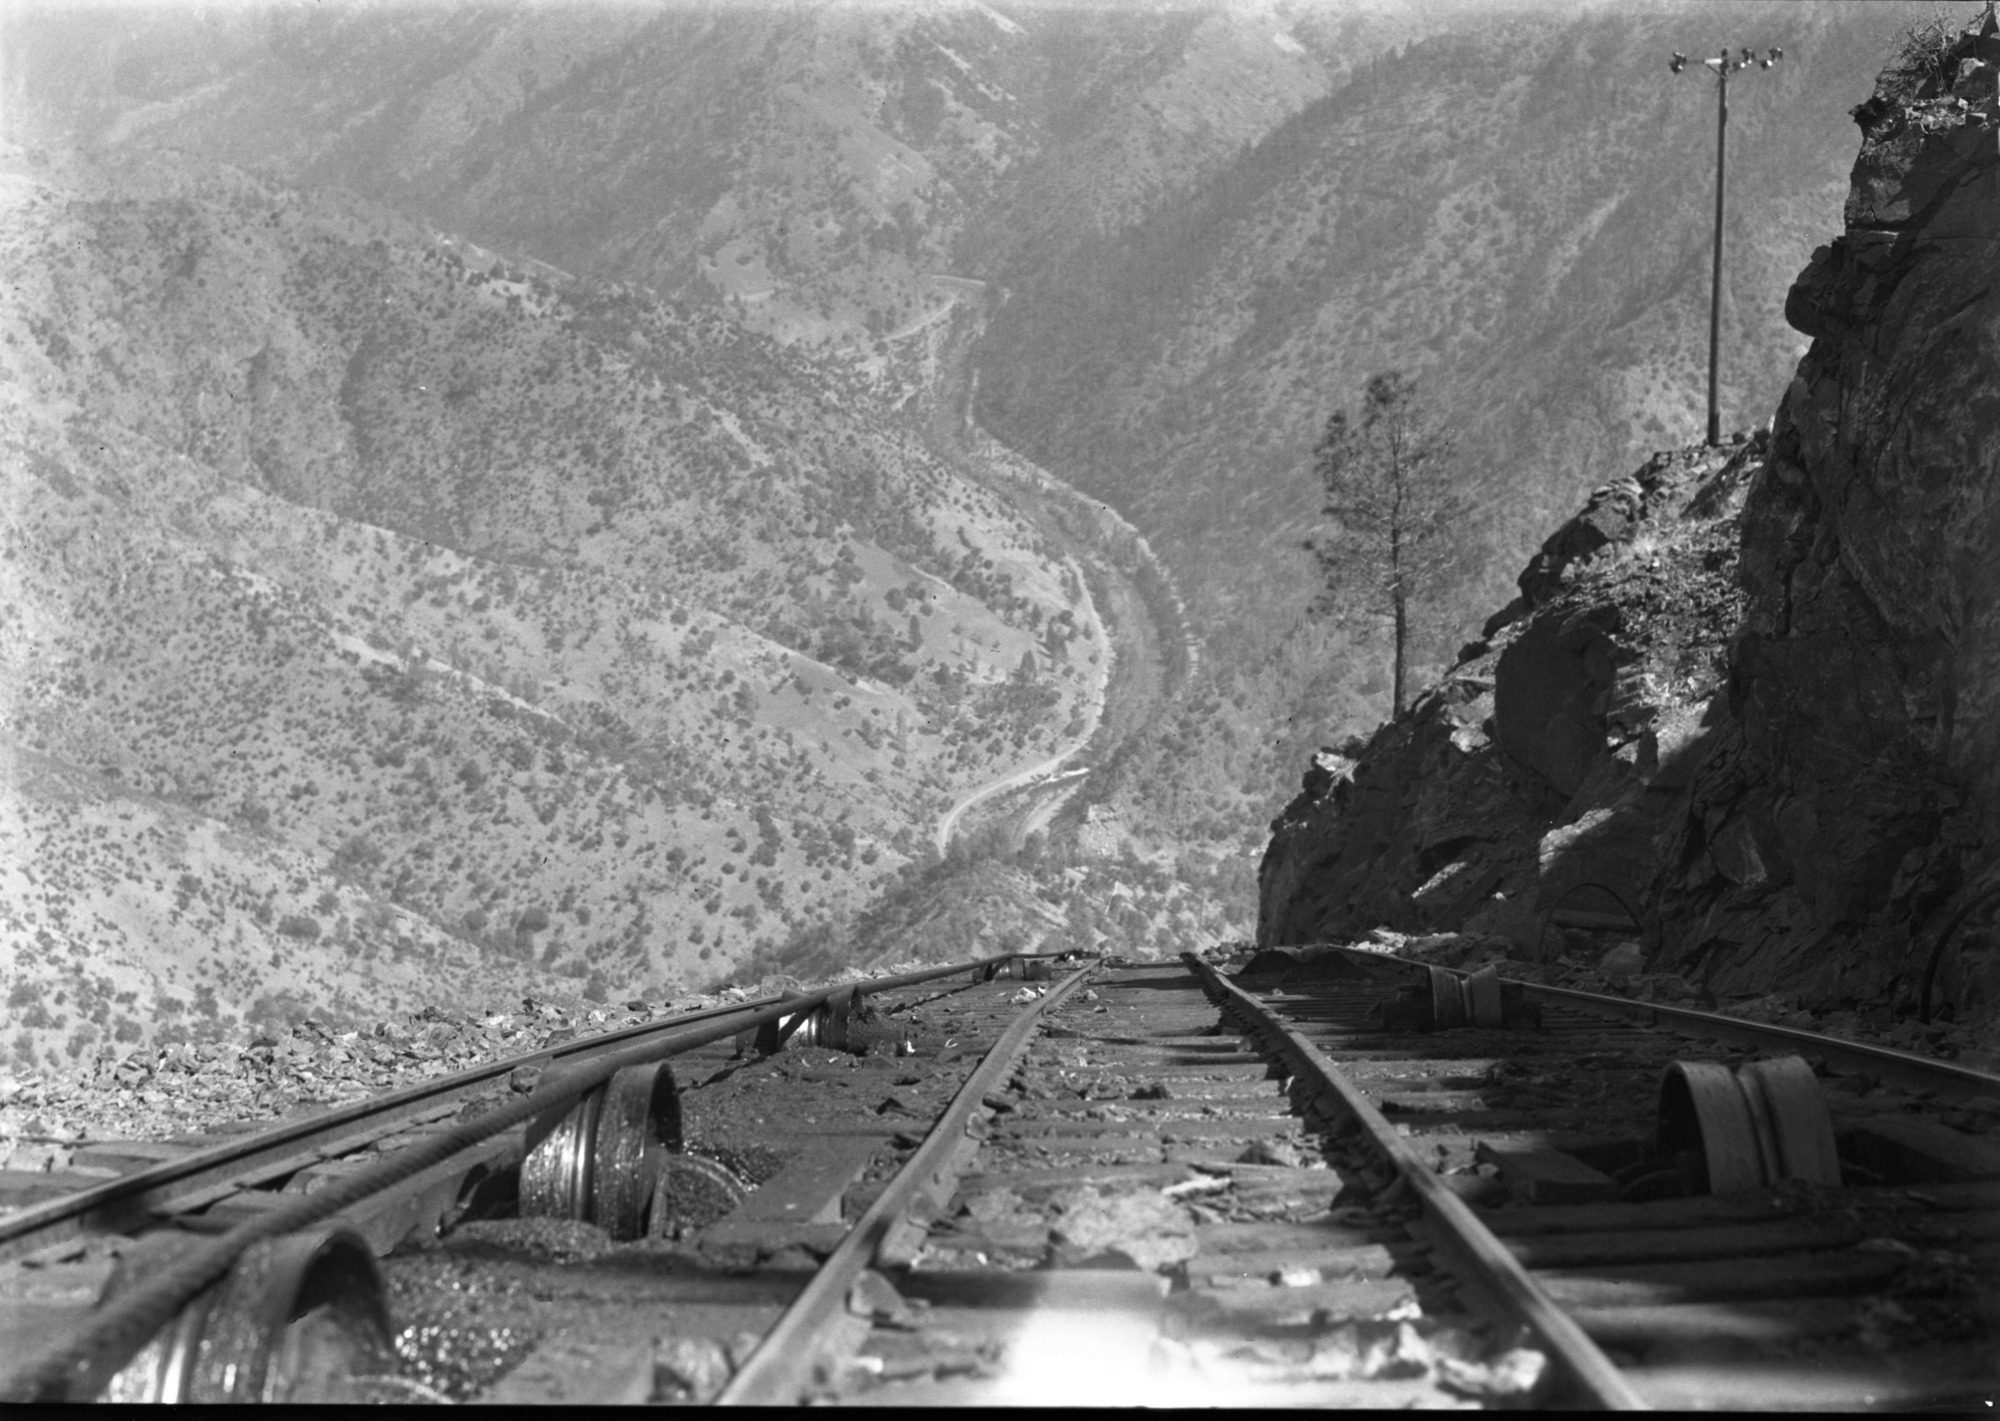 Yosemite Lumber Co. - Looking down Incline, into Merced River canyon.